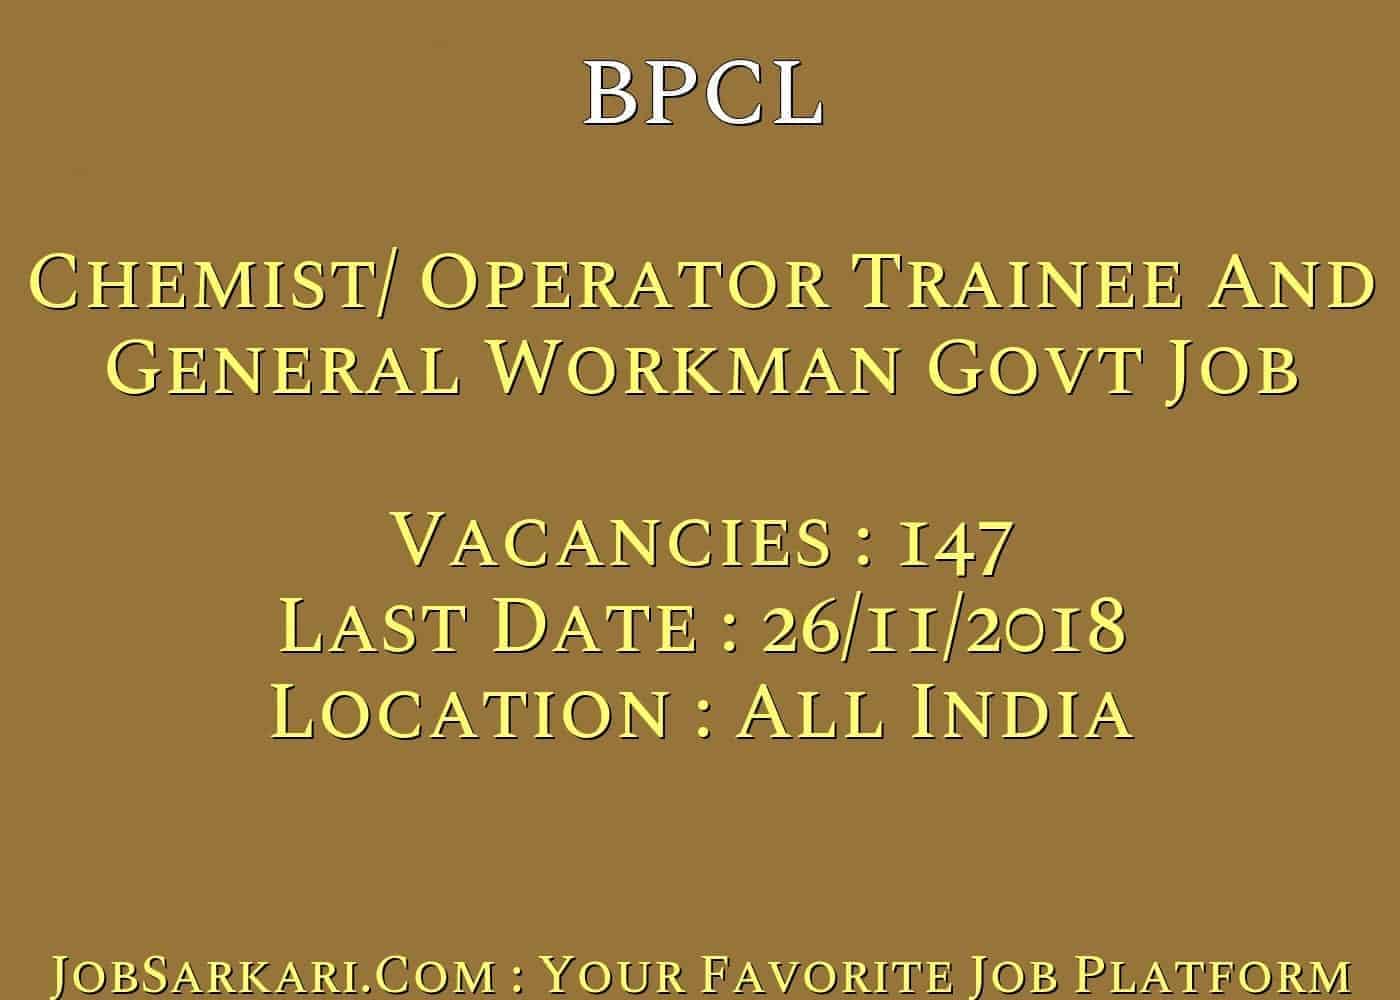 BPCL Recruitment 2018 For Chemist/ Operator Trainee And General Workman Govt Job